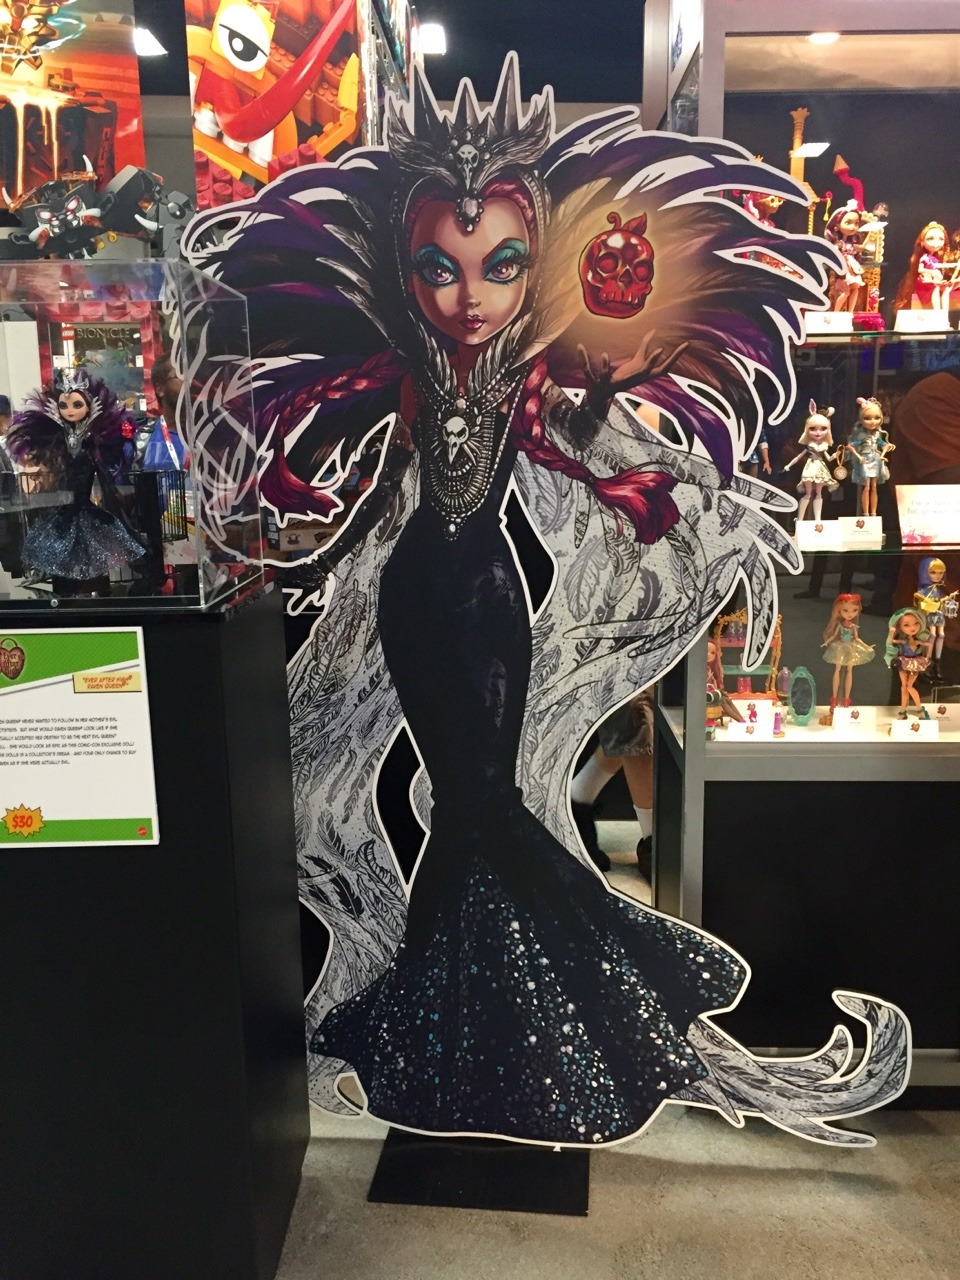 kataramov:

It didn’t quite occur to me in my excitement that Tumblr people would appreciate this as much as Instagram would. So here’s the big cutout of Raven, featuring artwork by Lauren Montgomery, which is also on the back of her box!